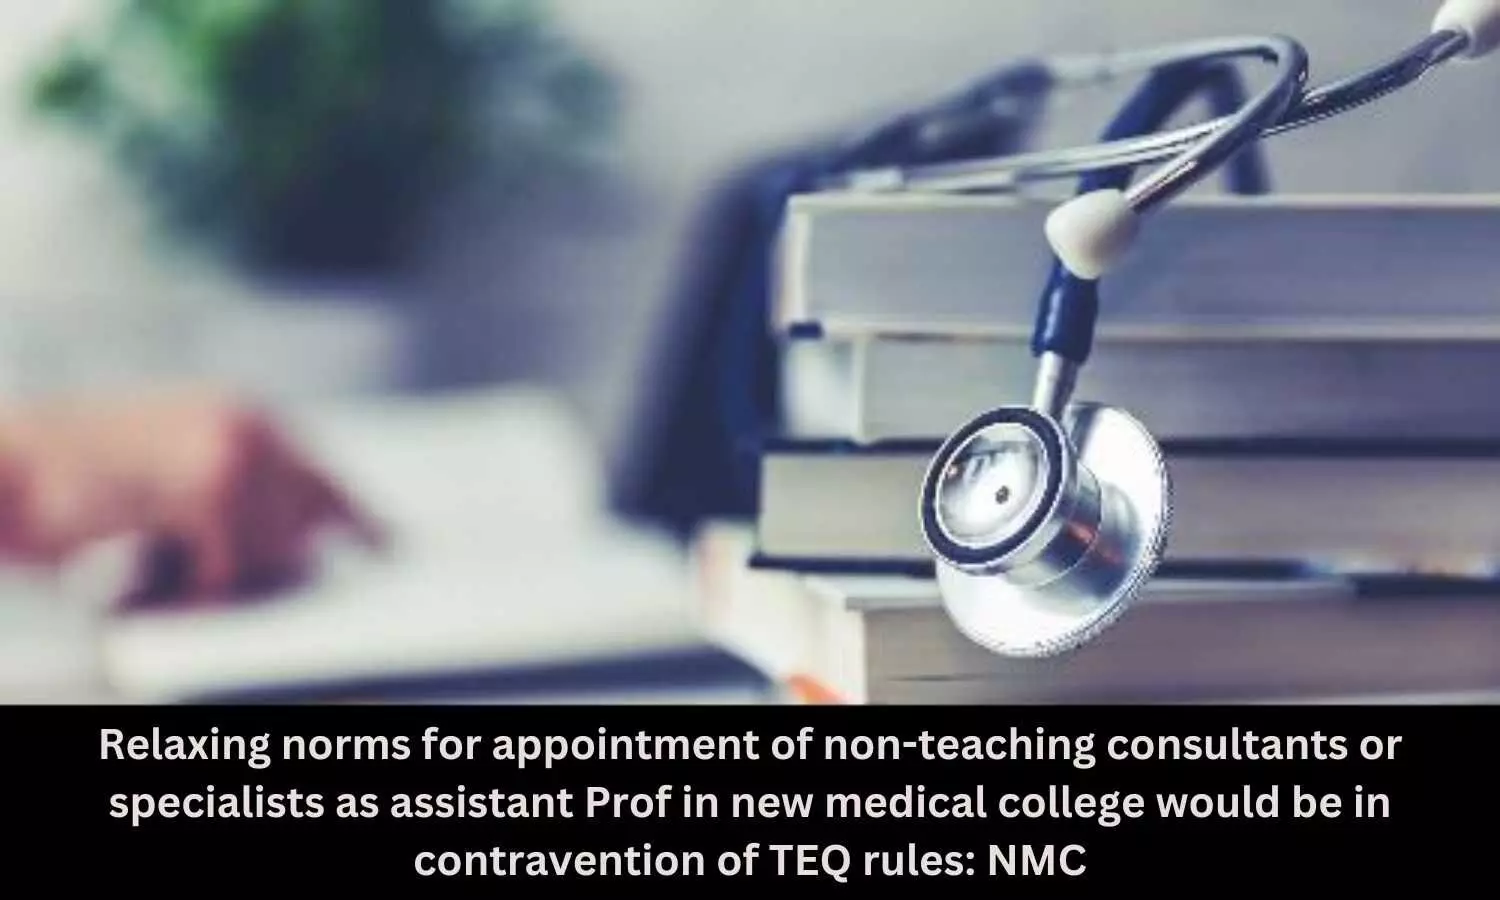 Relaxing Norms for appointment of non-teaching consultants or specialists as assistant Prof in new medical college would be in contravention of TEQ rules: NMC